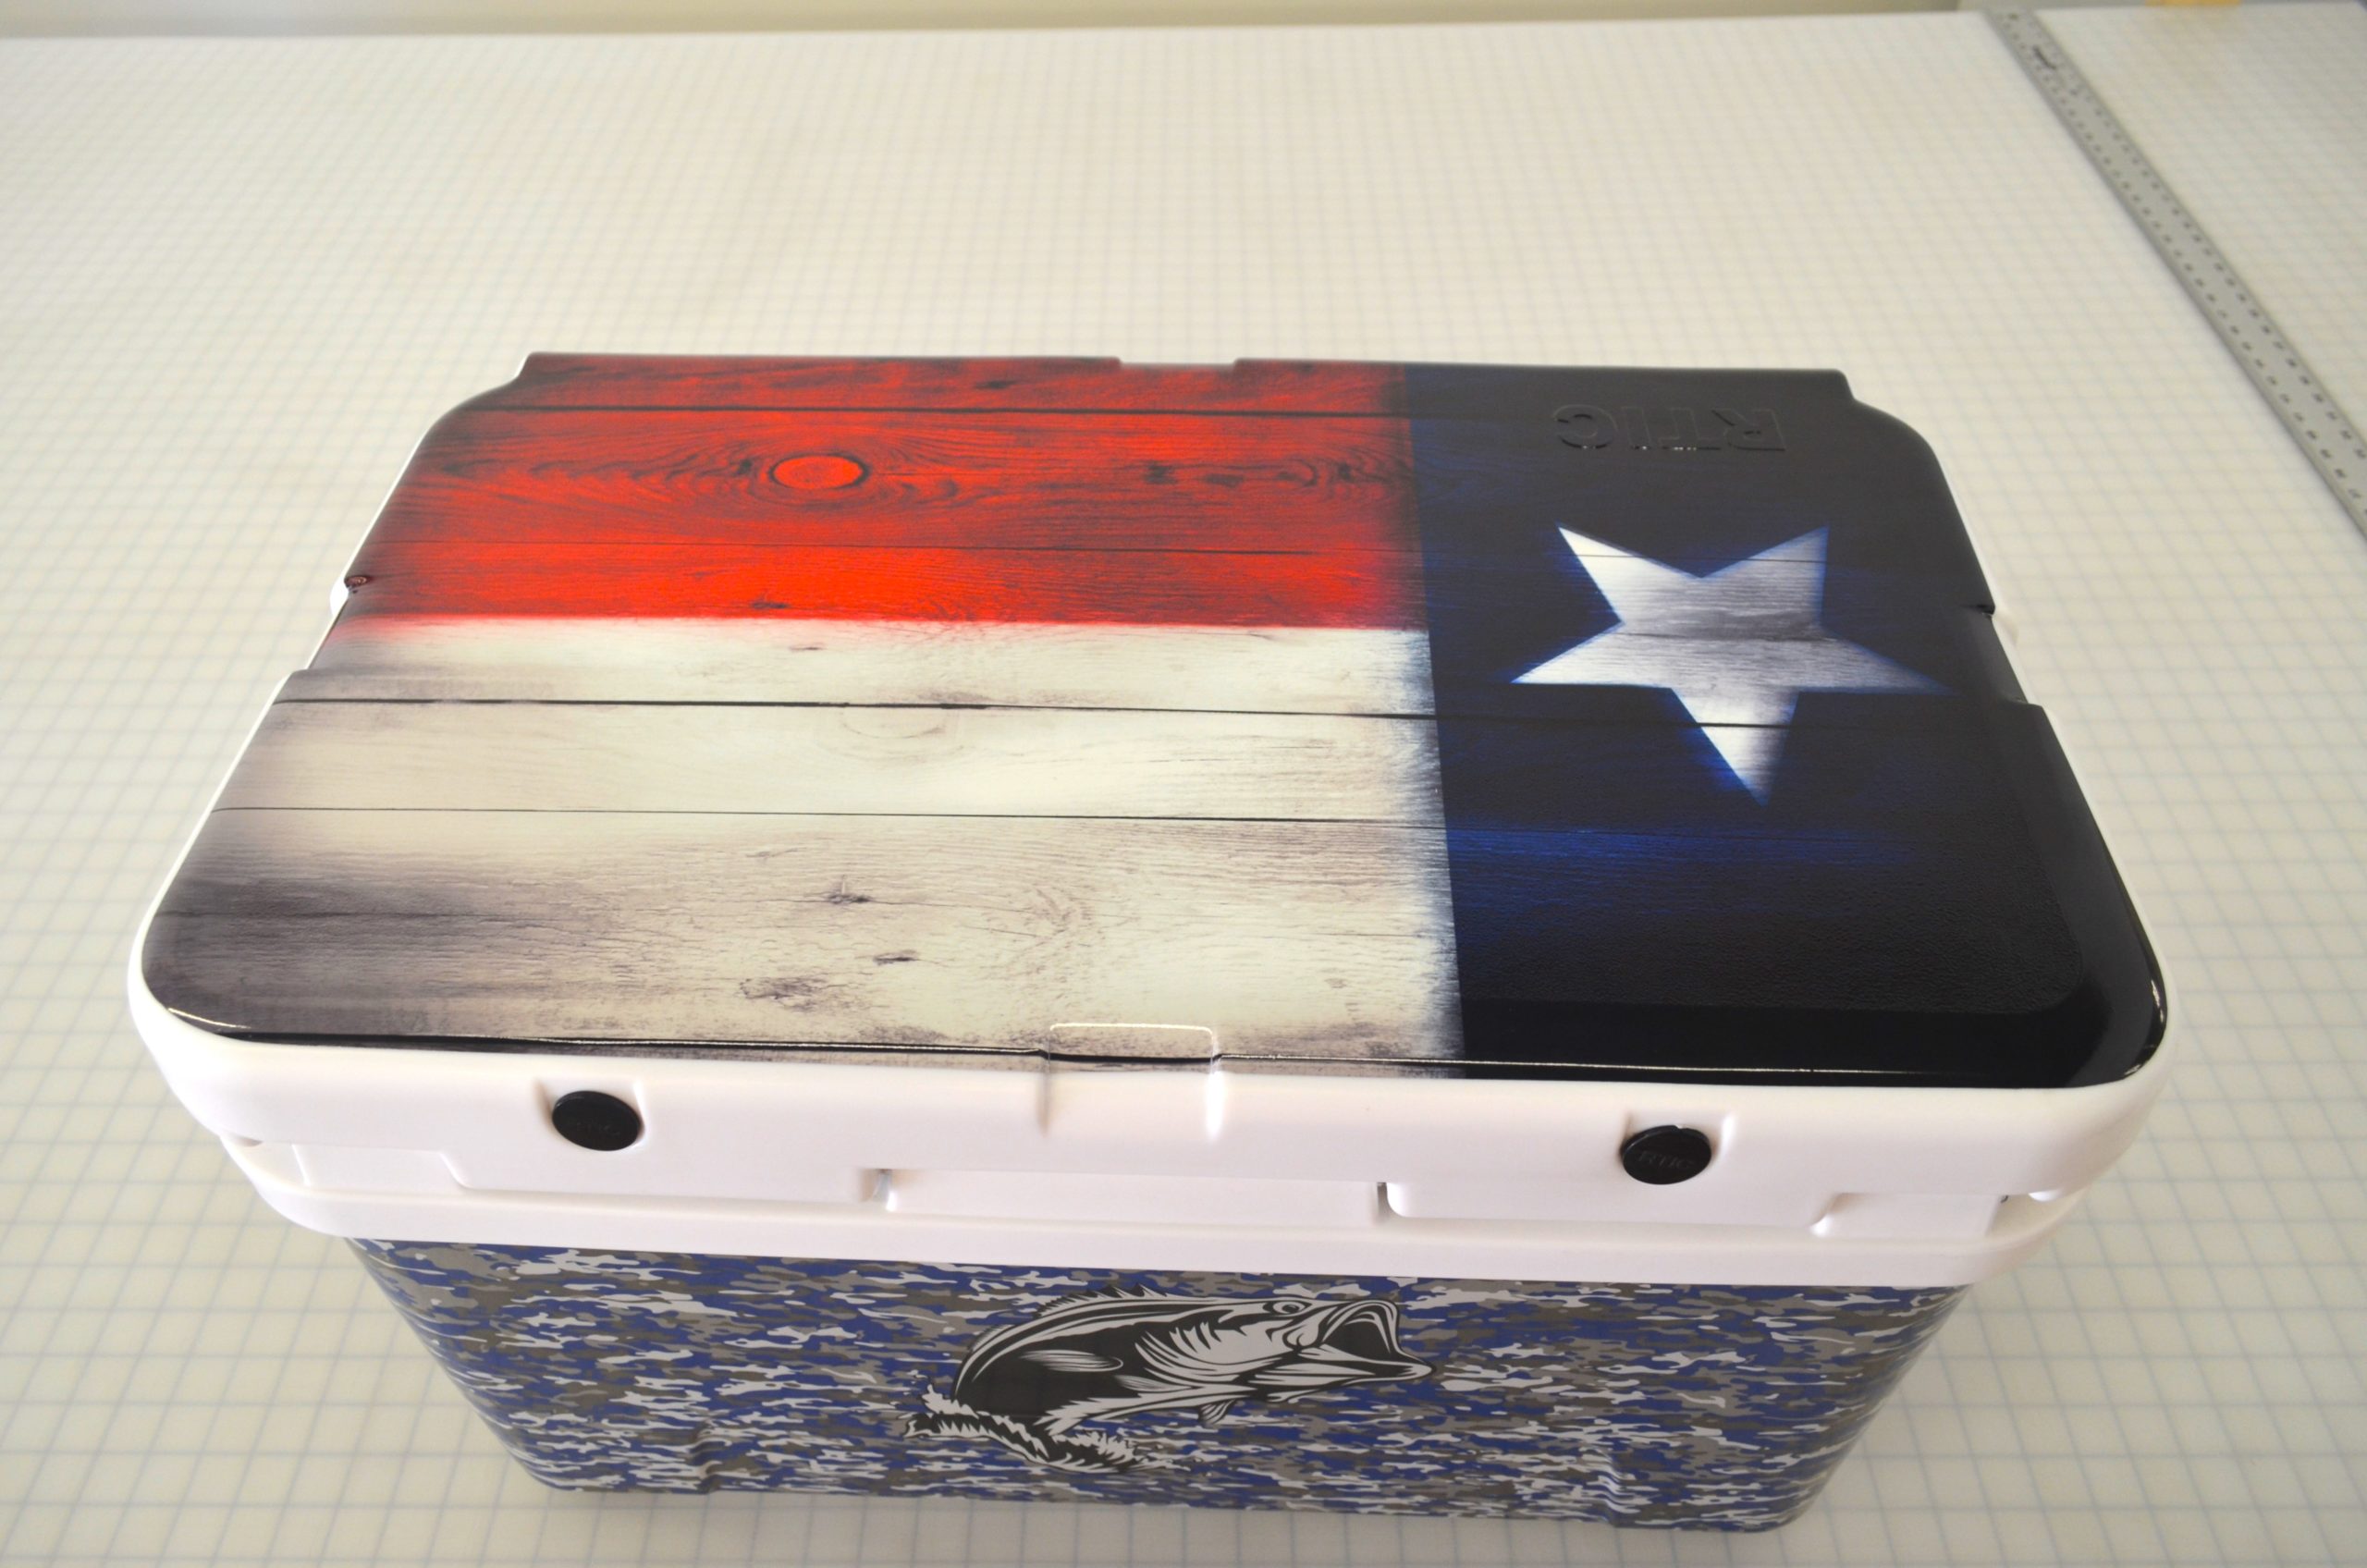 YETI Cooler Covers by PoppTops Custom Covers.